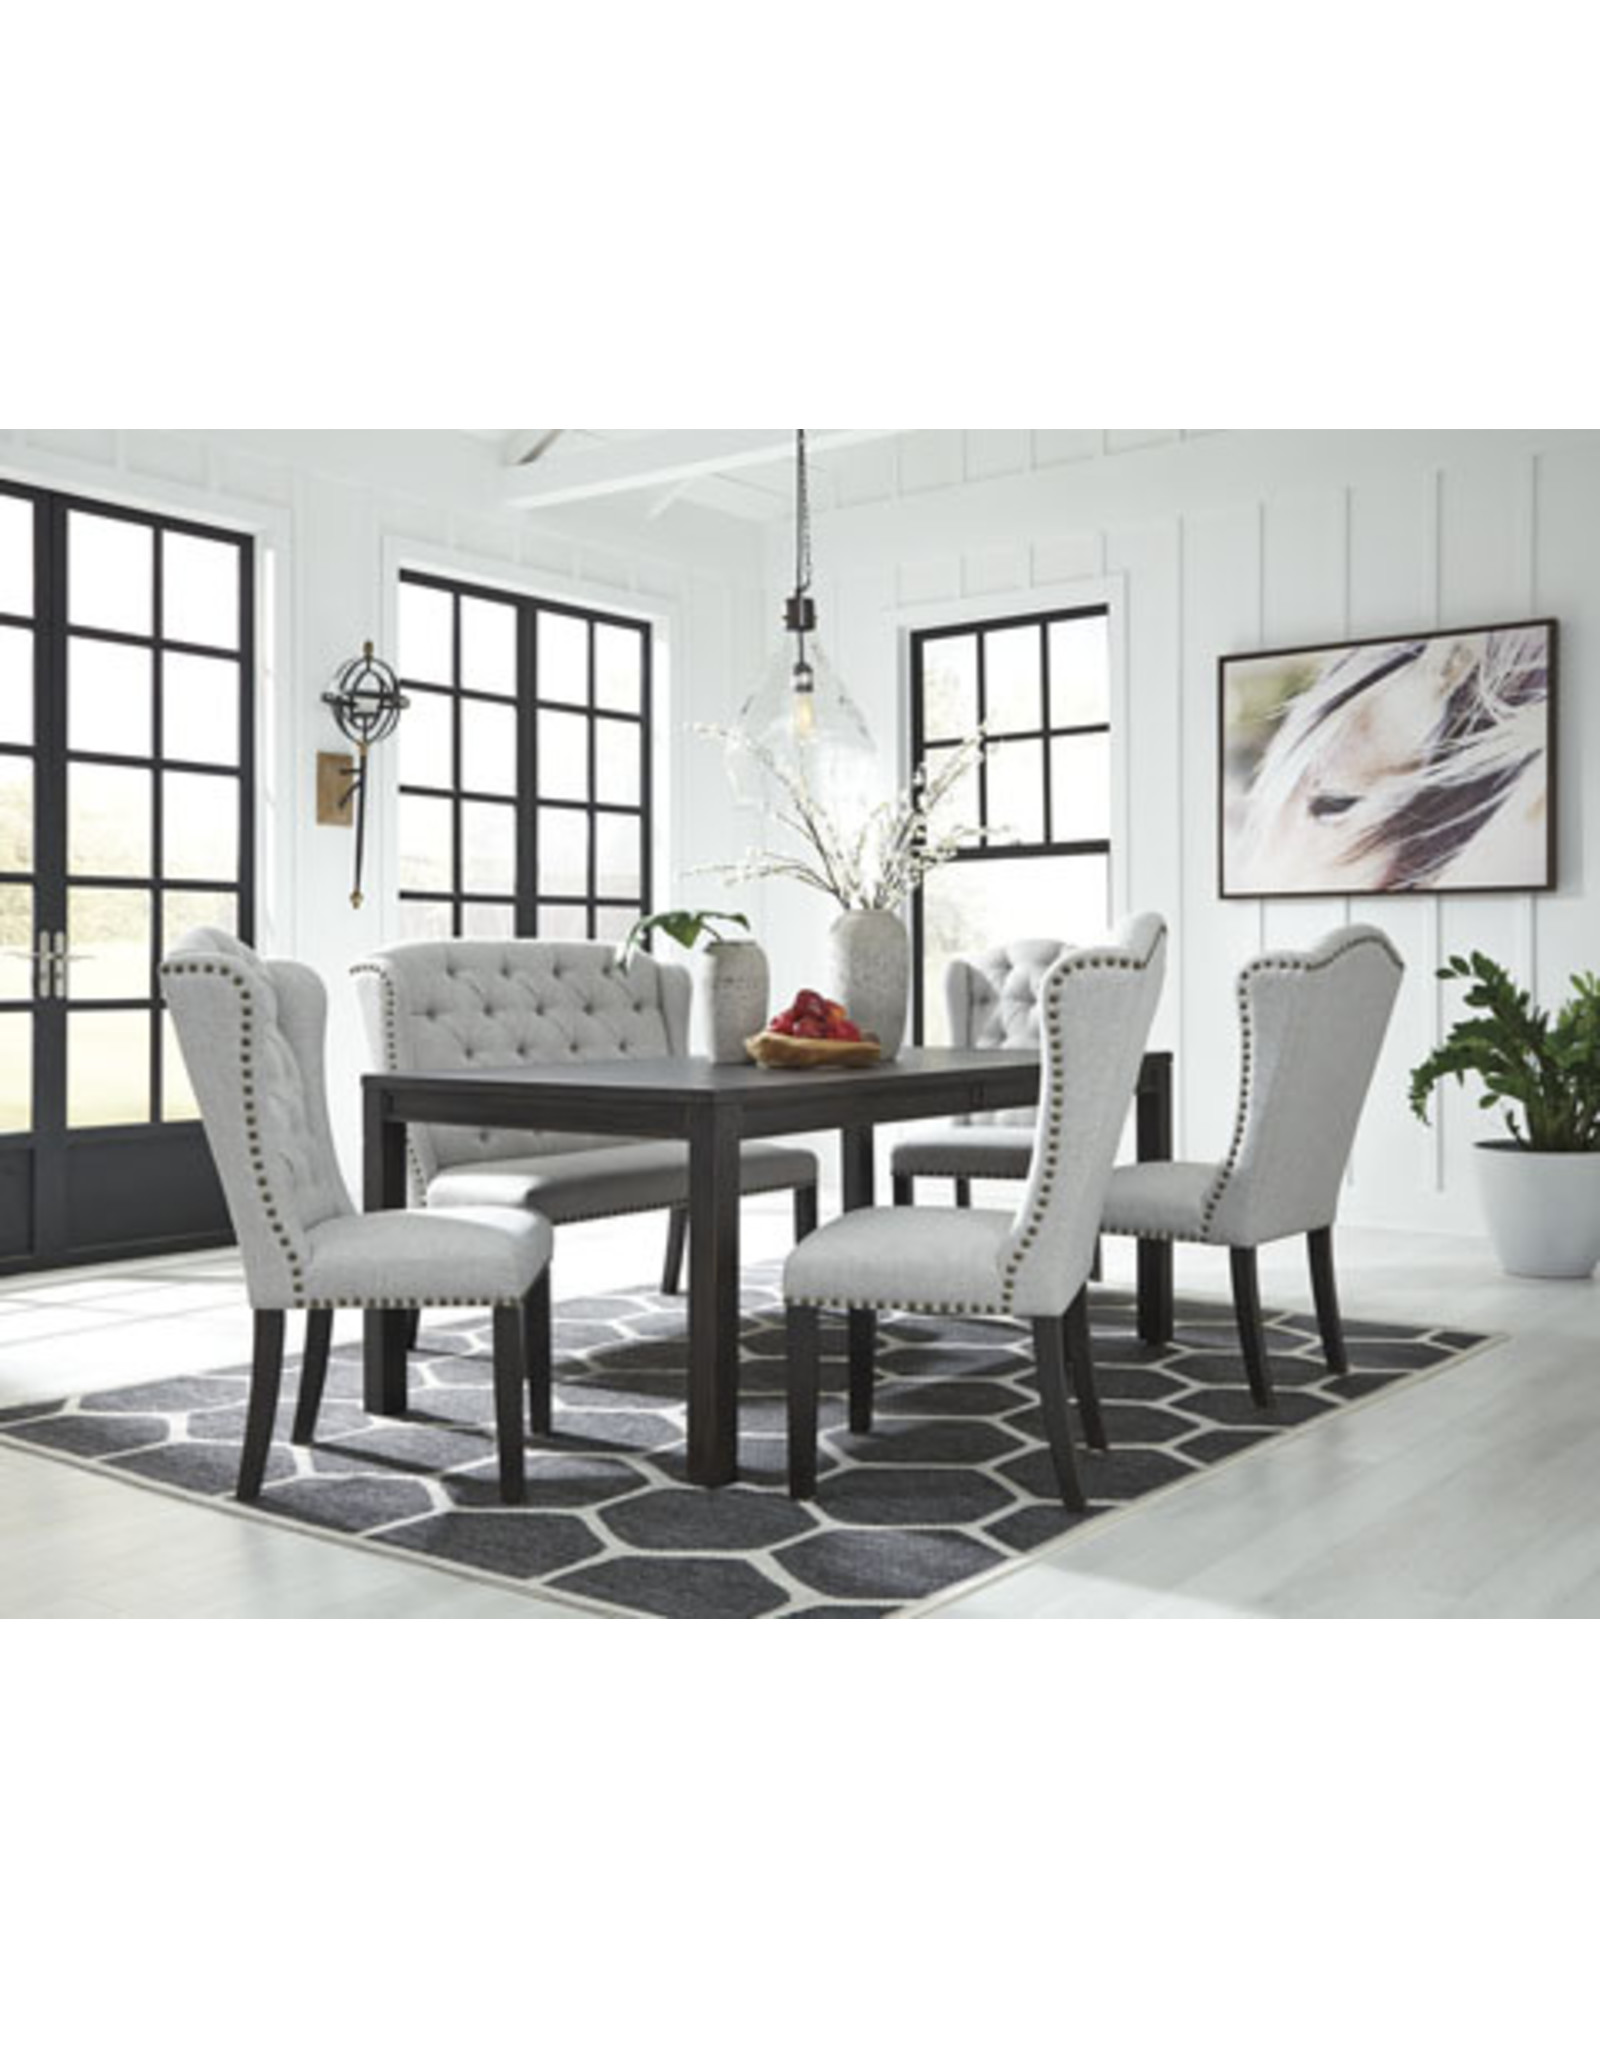 Jeanette D702-25 Dining table